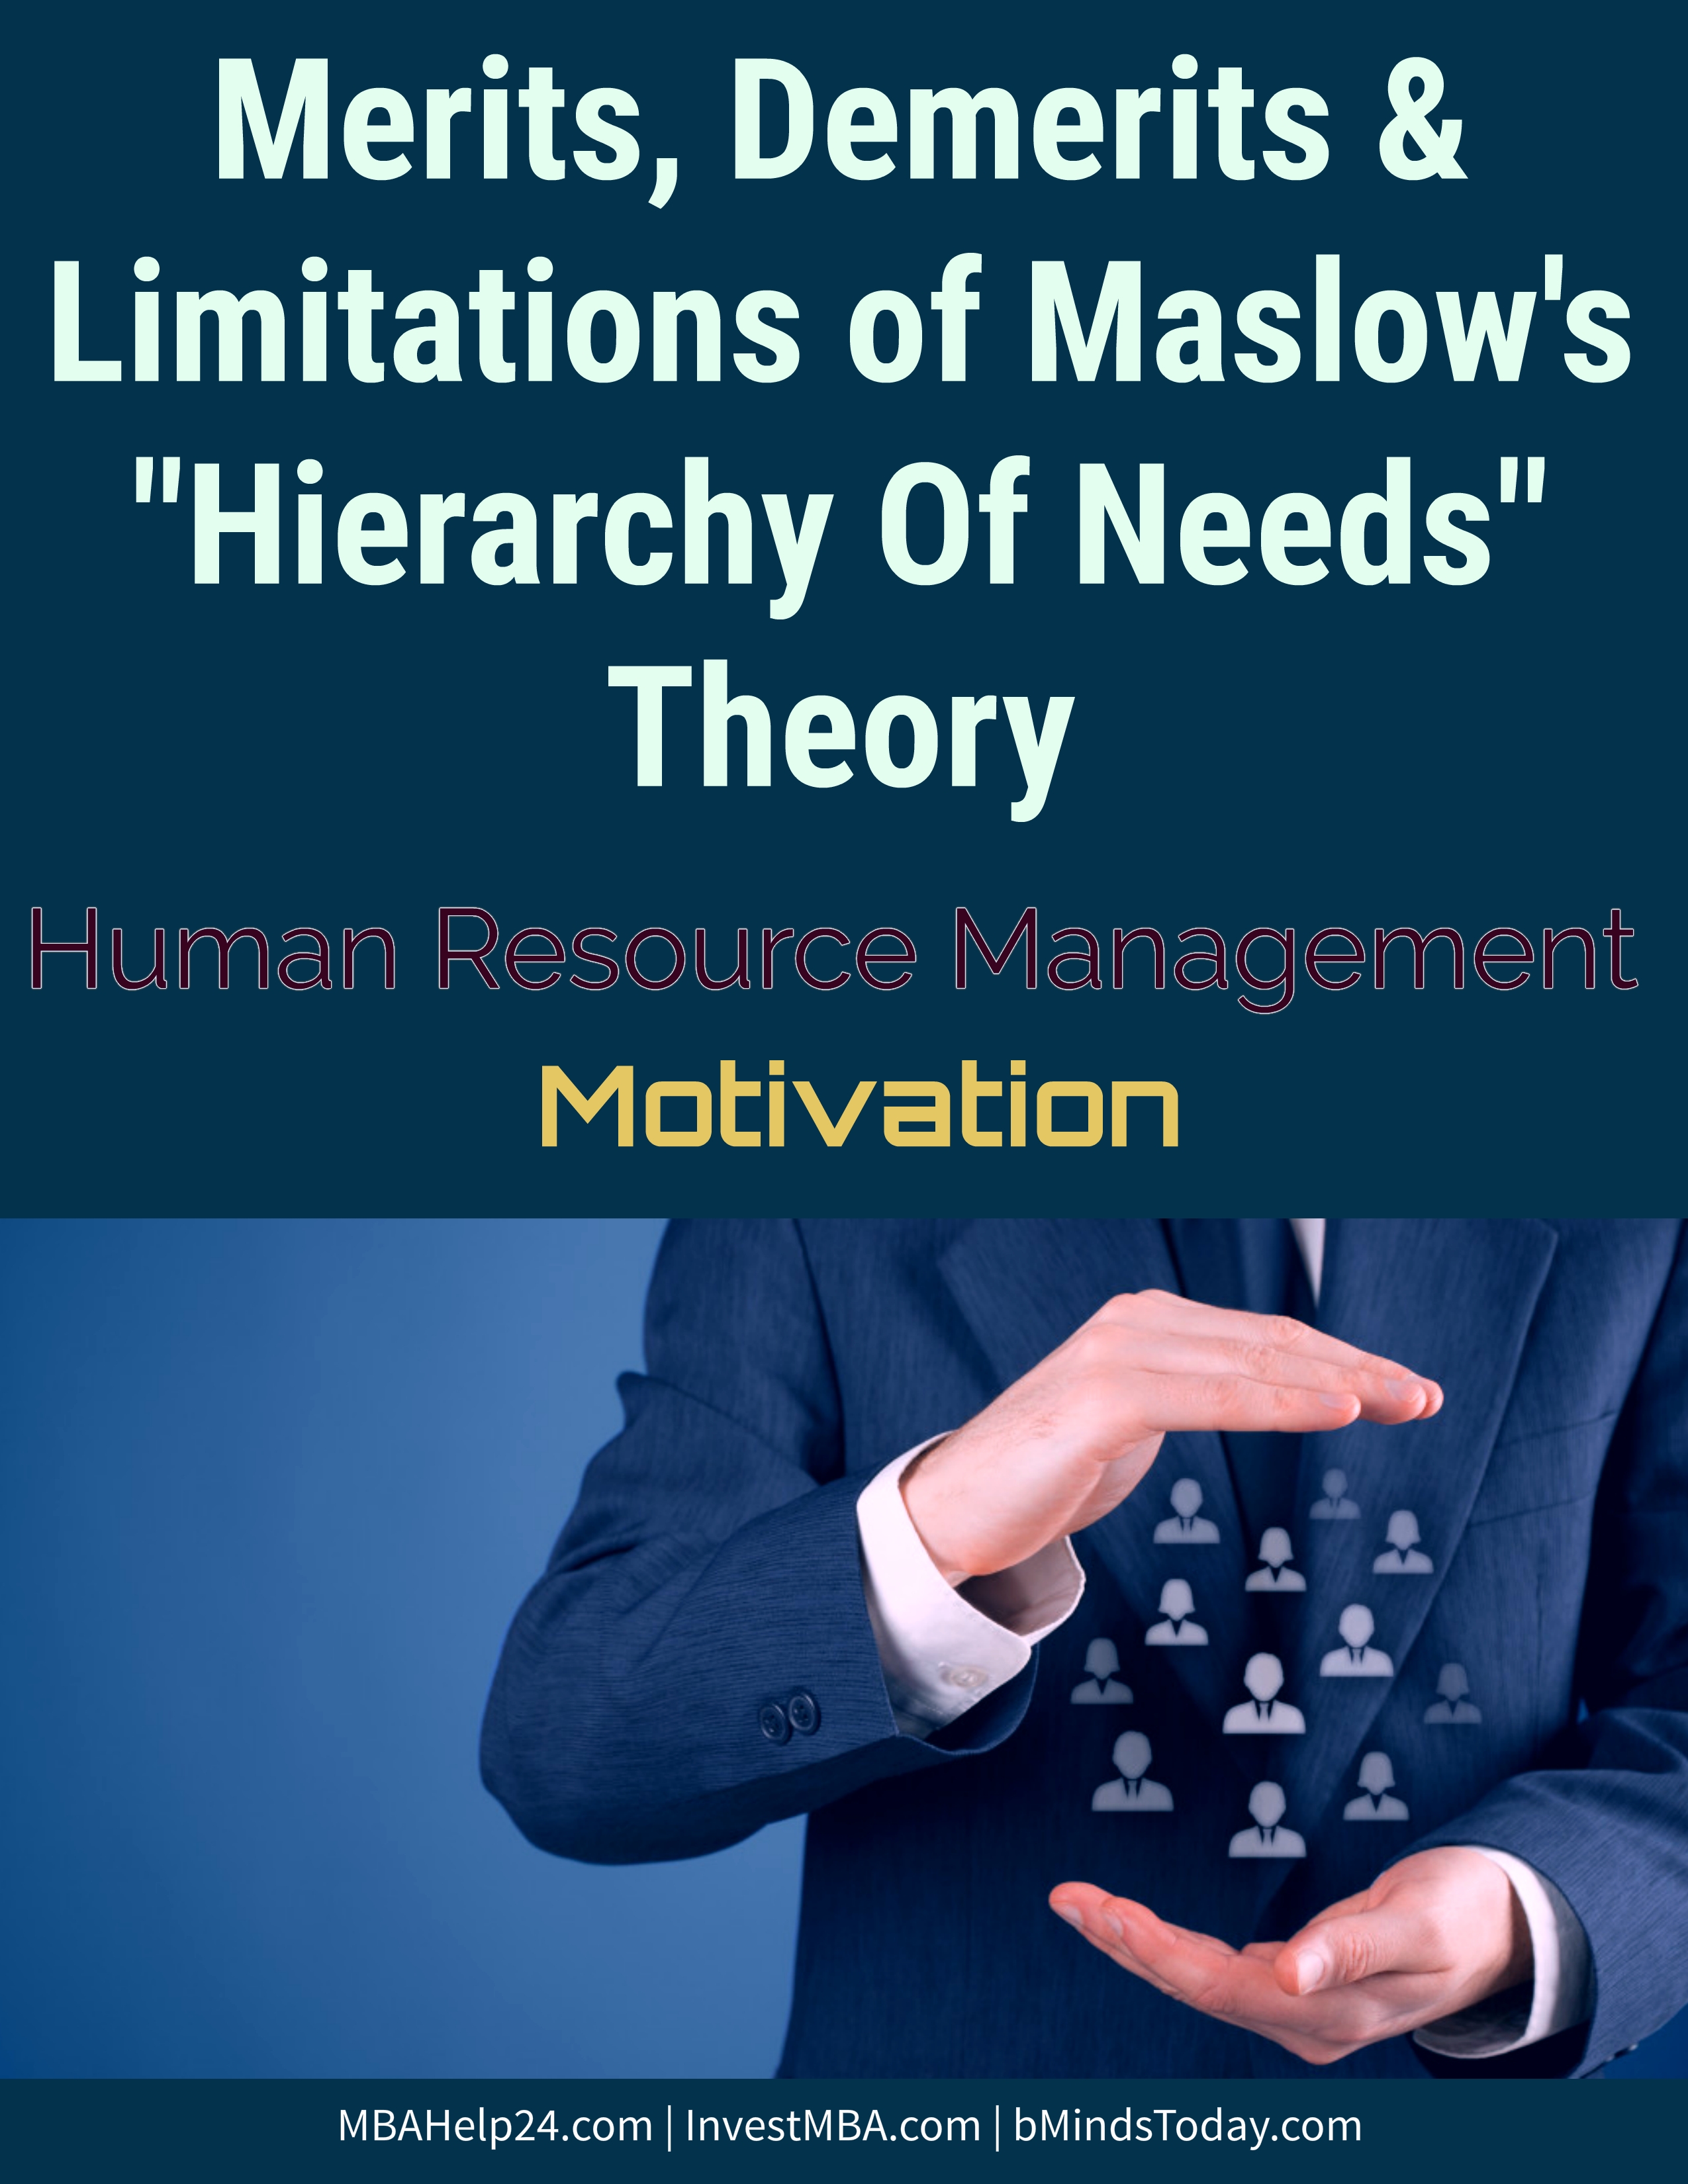 Advantages, Disadvantages and Limitations of Maslow's Hierarchy of Need Theory hierarchy of needs Limitations Of Maslow’s &#8216;Hierarchy of Needs’ Theory | Merits | Demerits advantages disadvatages and limitations of maslow hierarchy of needs theory